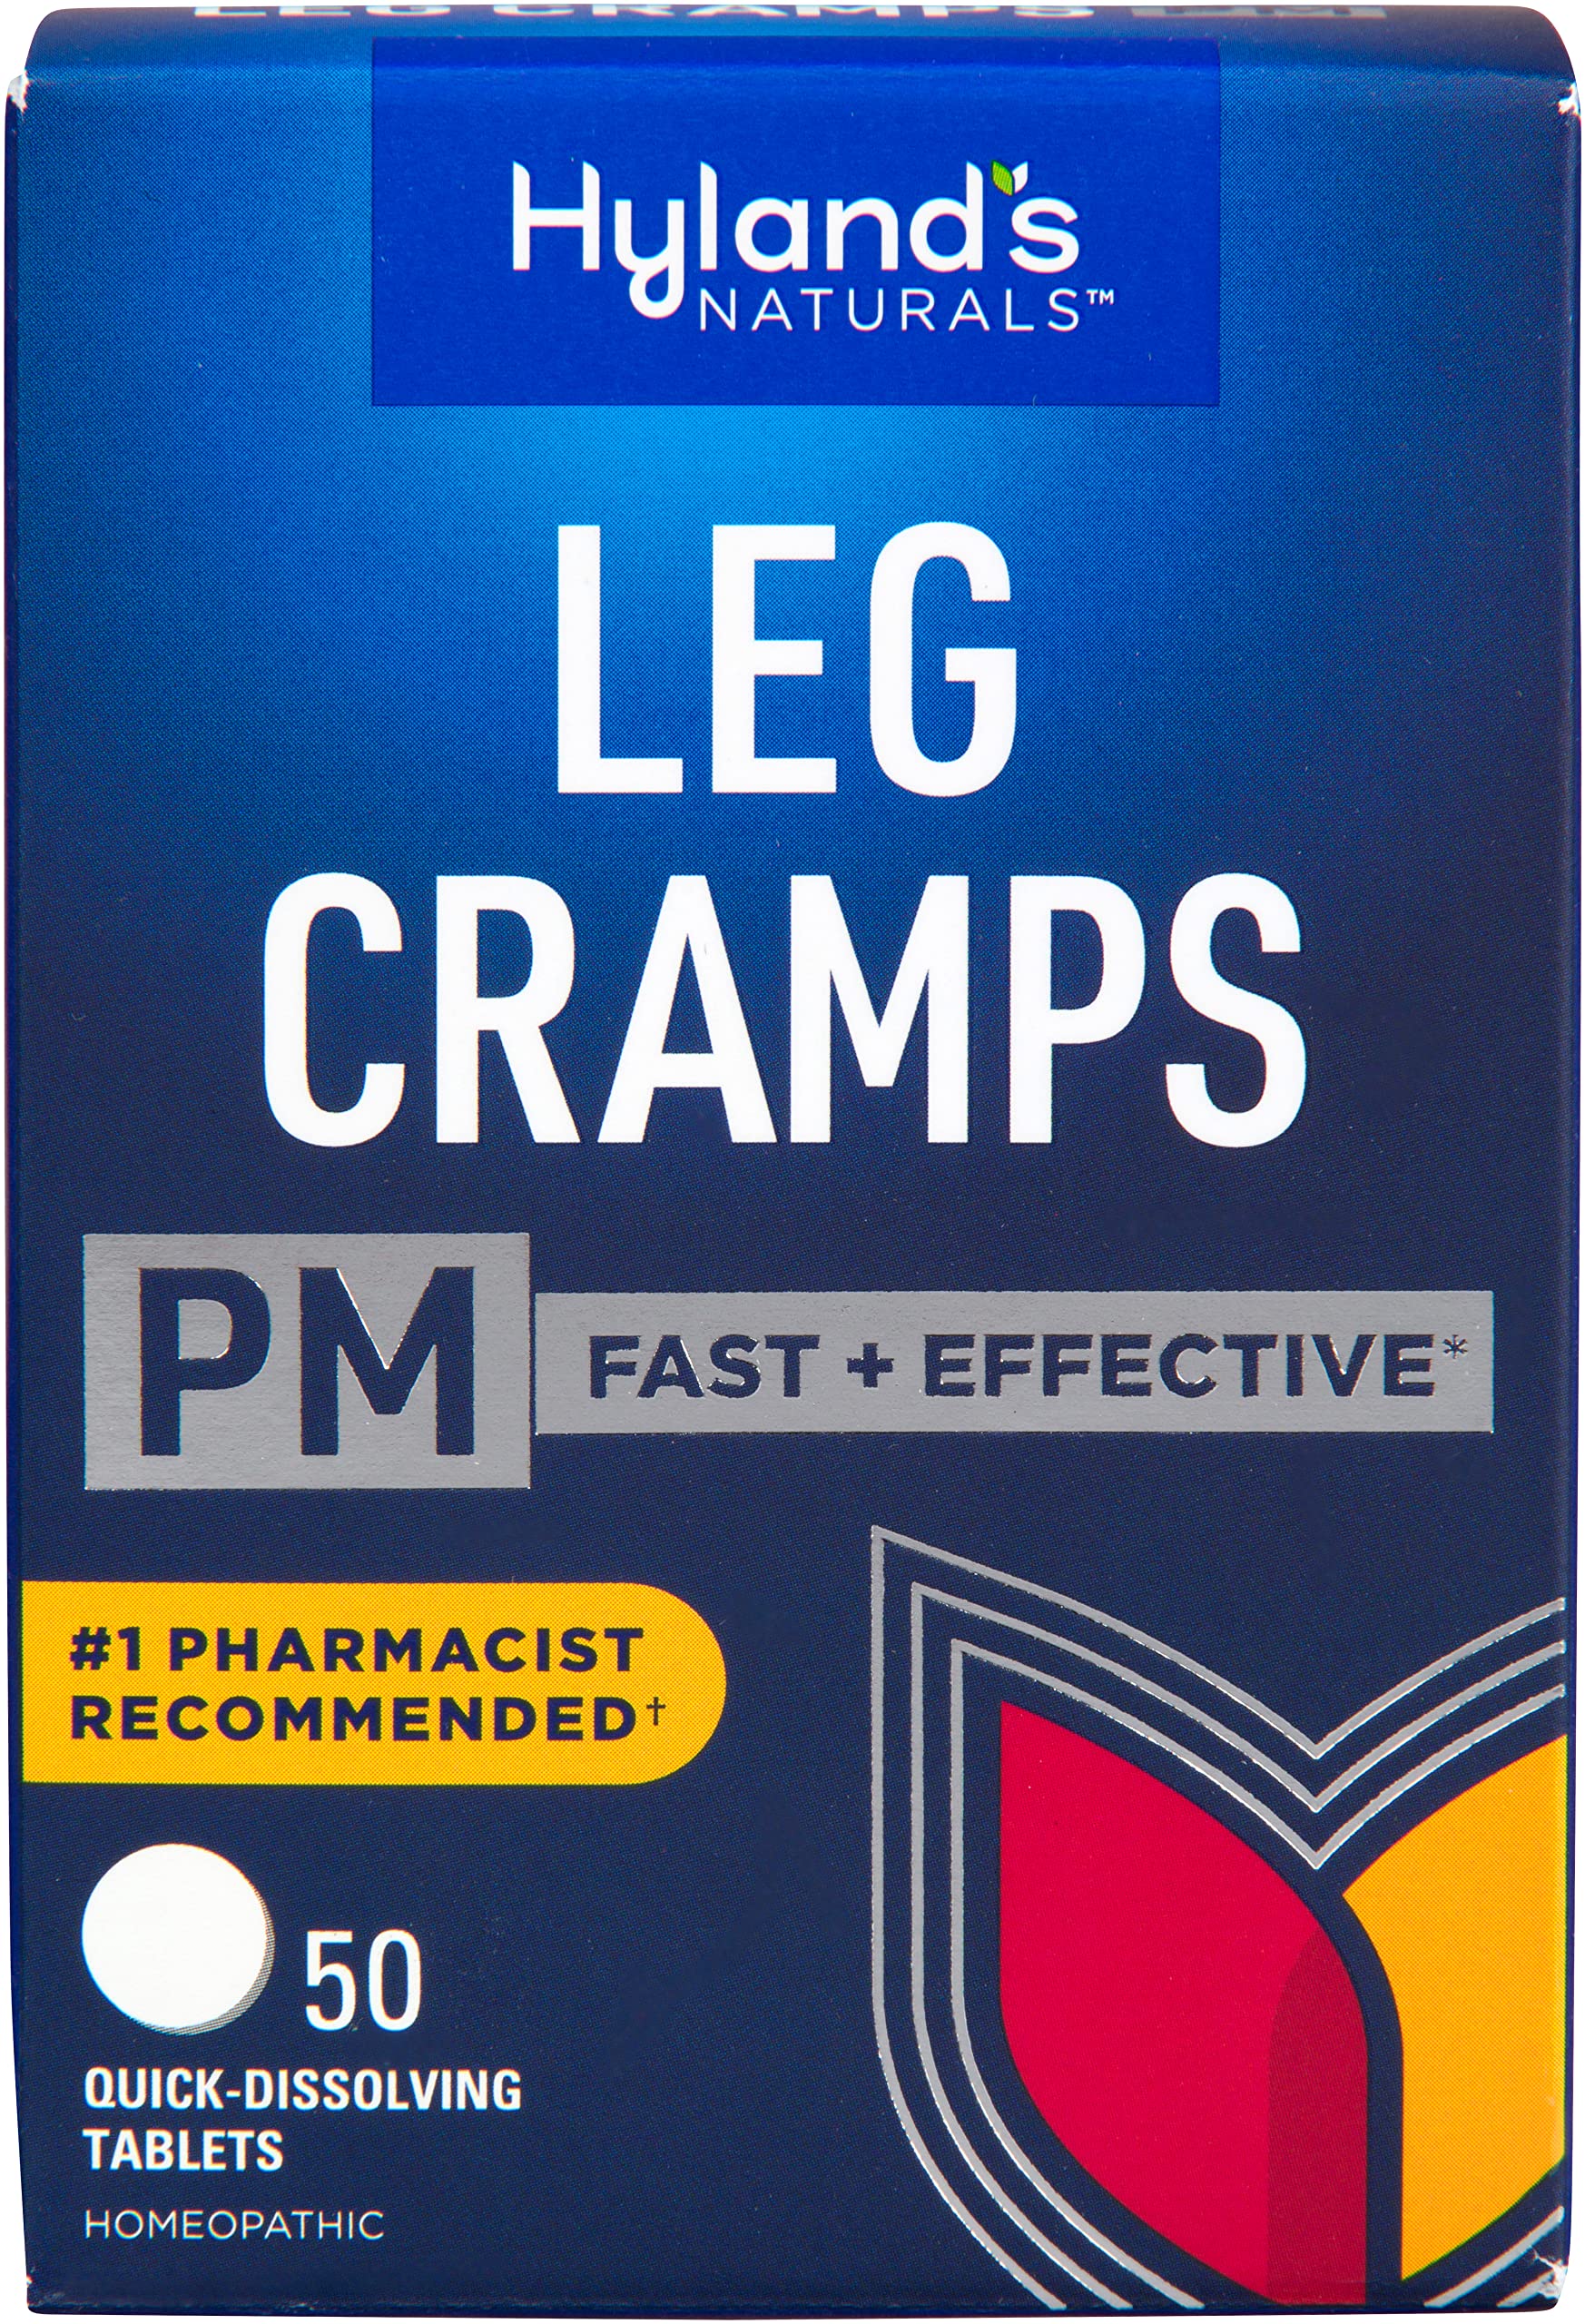 Hyland’s Naturals, Leg Cramps PM Tablets, Nighttime Formula, Natural Relief of Calf, Foot and Leg Cramps at Night, Quick Dissolving Tablets, 50 Count